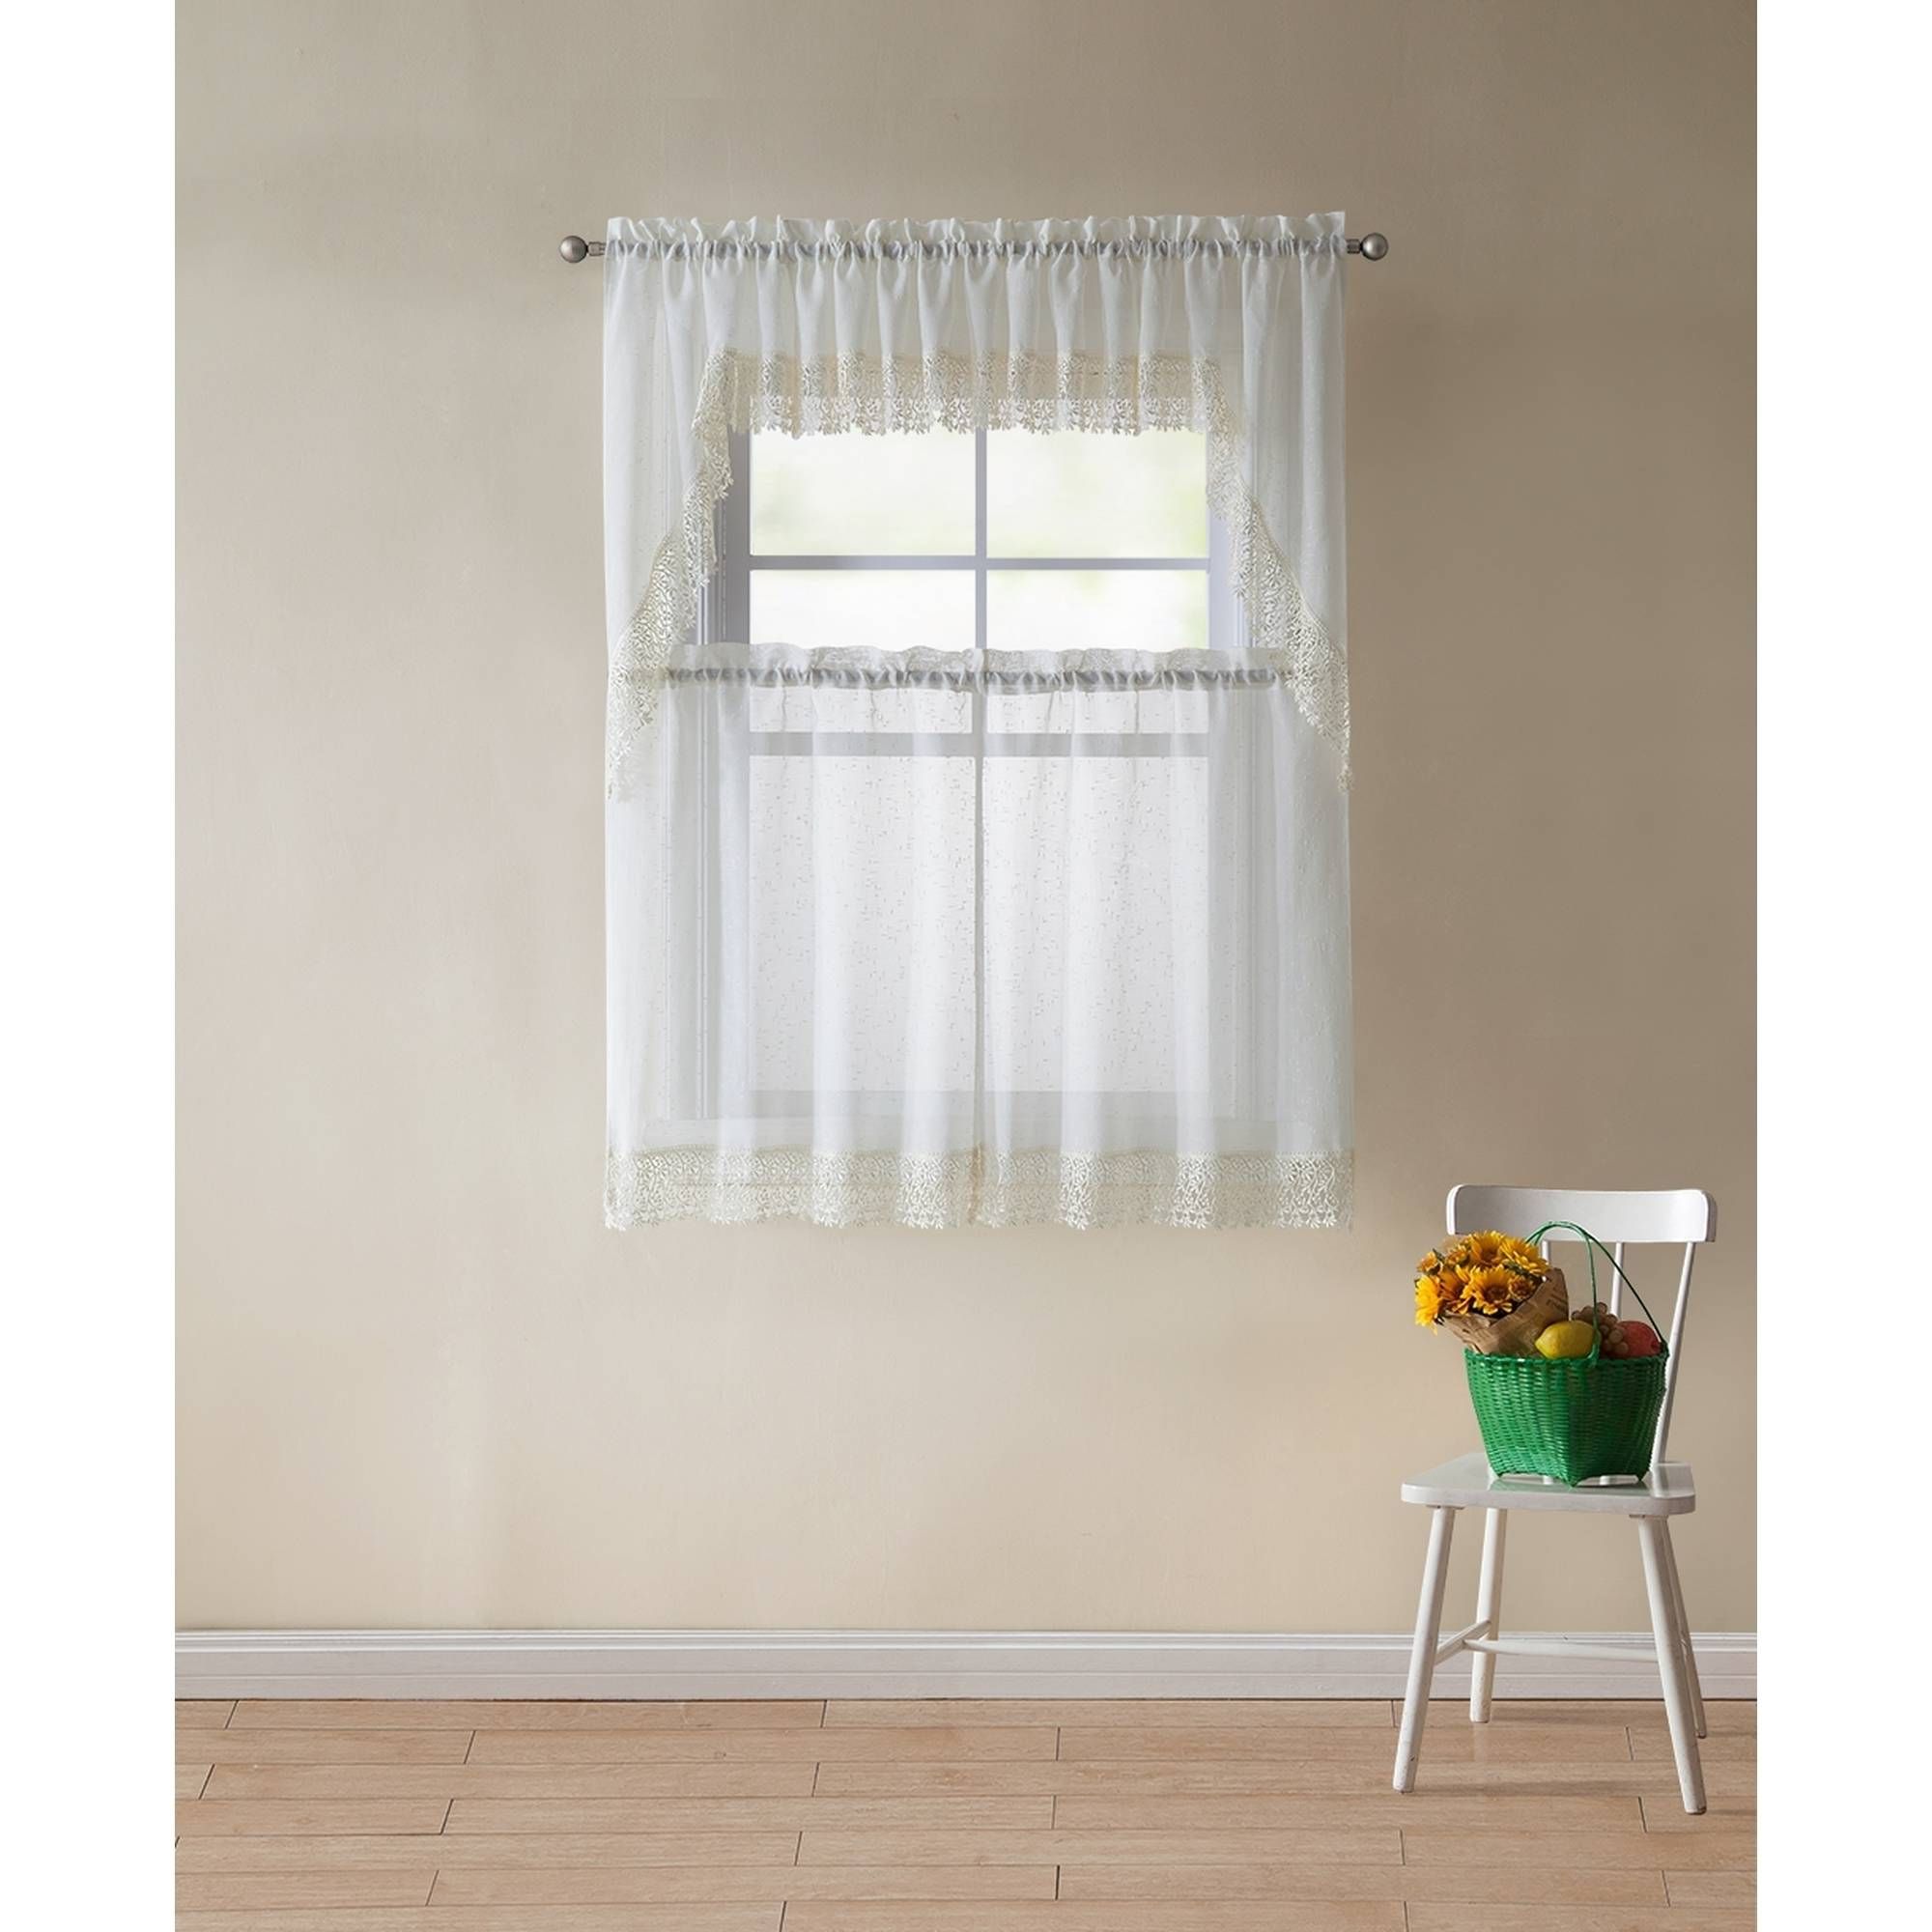 Kitchen Curtain Tiers With Most Recently Released Better Homes & Gardens Lace Vines Kitchen Curtain Tiers And Valances (View 17 of 20)